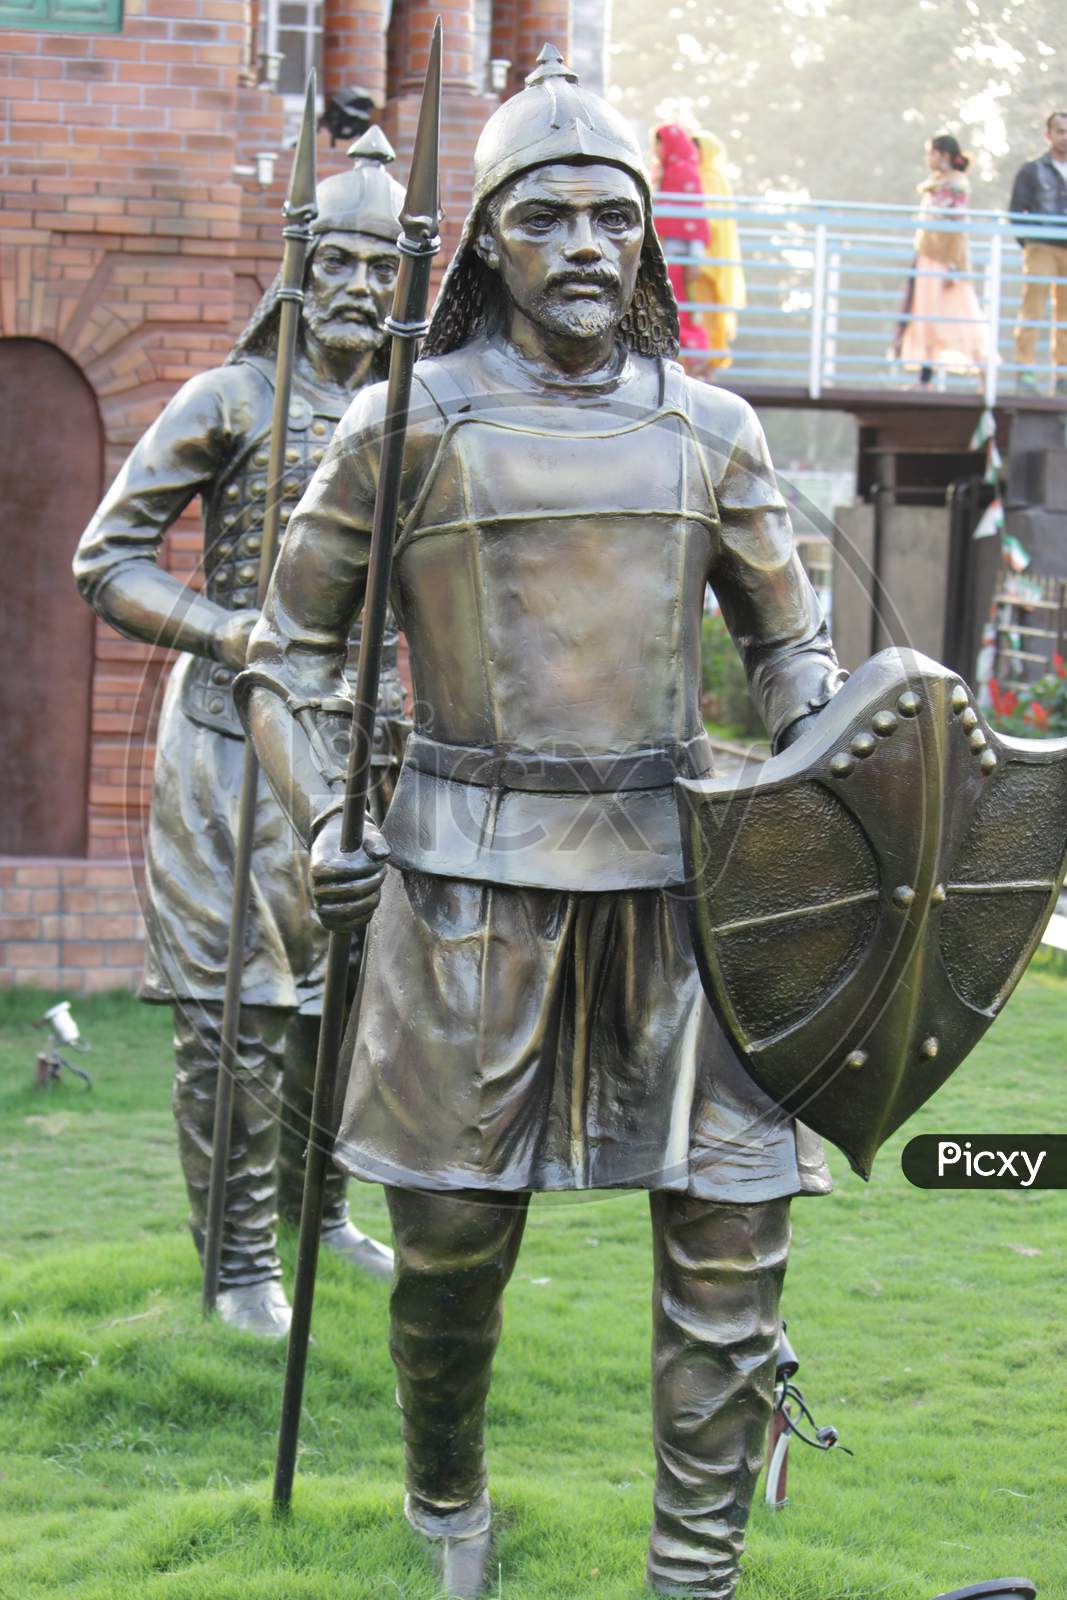 Metal made solid statue of historical Indian Knights or soldiers display at "Shivaji Park" on Sunday evening at Barasat, North 24 Parganas.